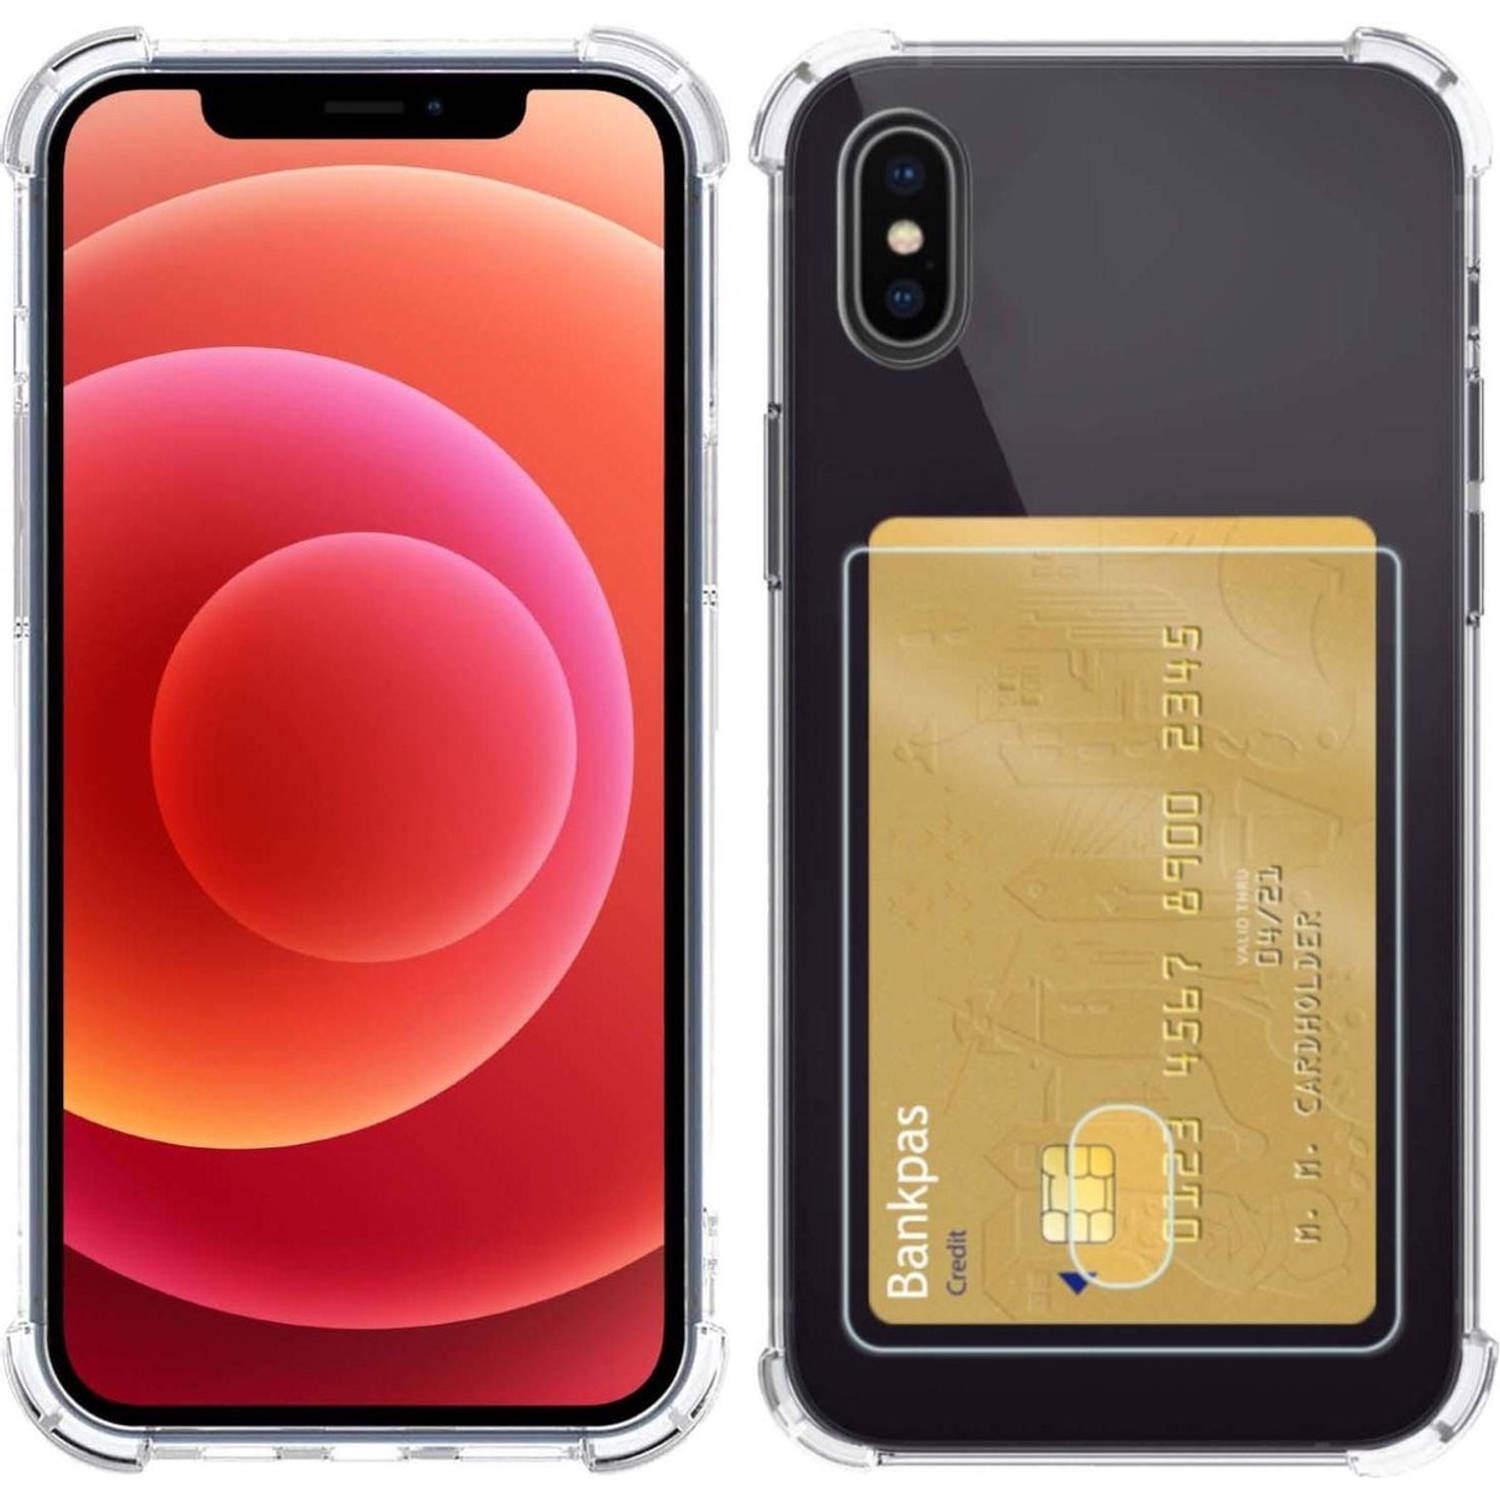 Basey Hoes Voor Iphone Xs Max Hoesje Met Pasjeshouder Transparant Card Case Shock Hoes